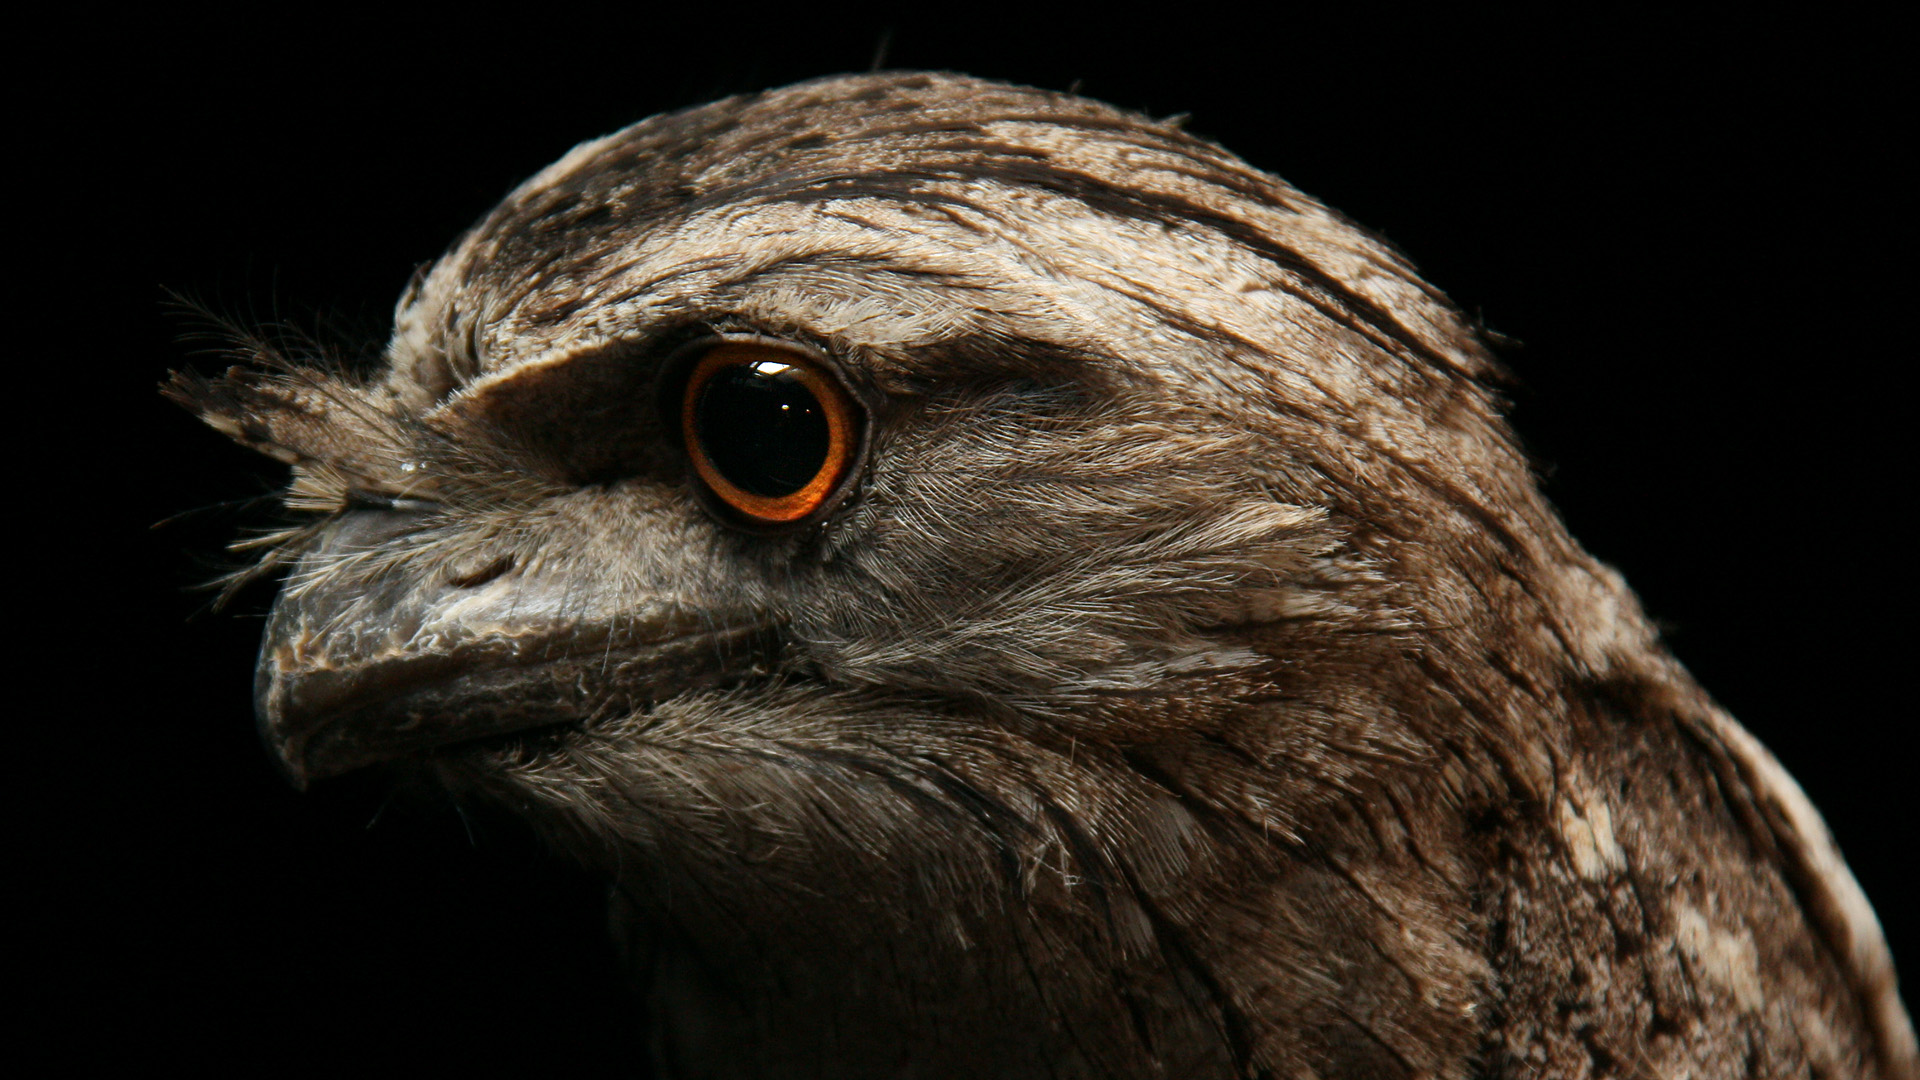 an image of an owl looking into the camera